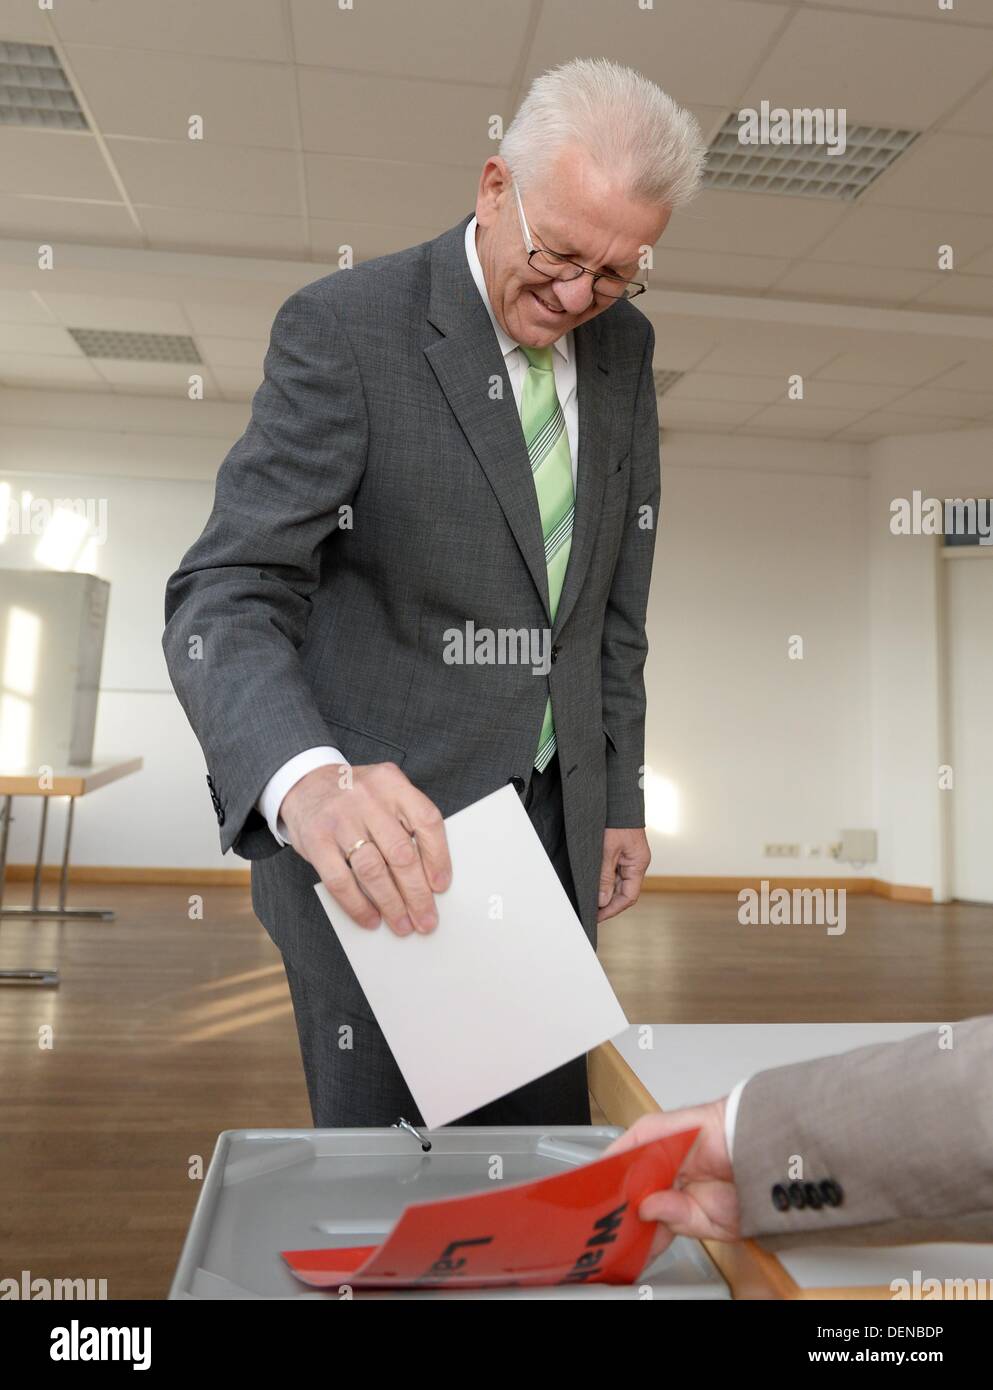 Sigmaringen, Germany. 22nd Sep, 2013. Premier of Baden-Wuerrtemberg Winfried Kretschmann casts his vote at a polling station at city hall for the 2013 German federal elections in Laiz near Sigmaringen, Germany, 22 September 2013. Photo: BERND WEISSBROD/dpa/Alamy Live News Stock Photo